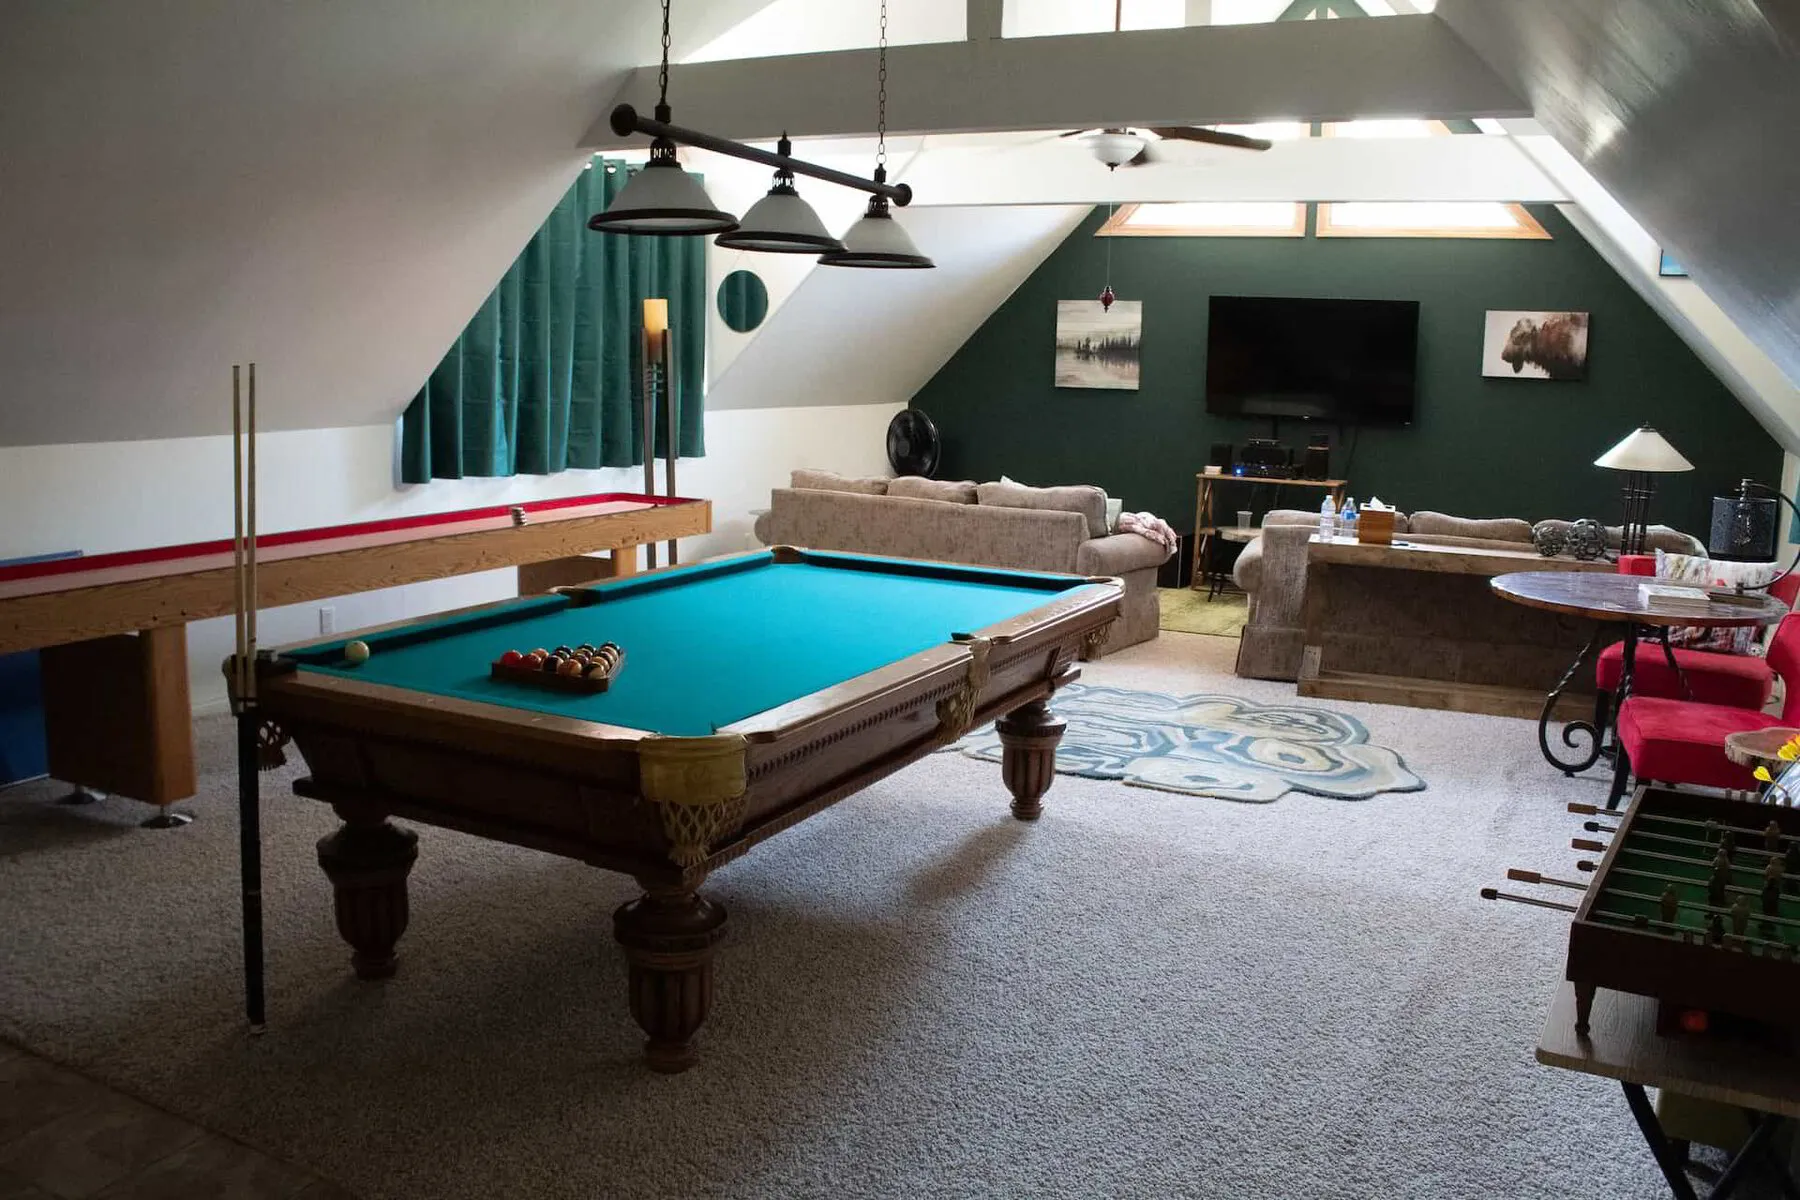 A game room with a pool table, arcade games, and a foosball table